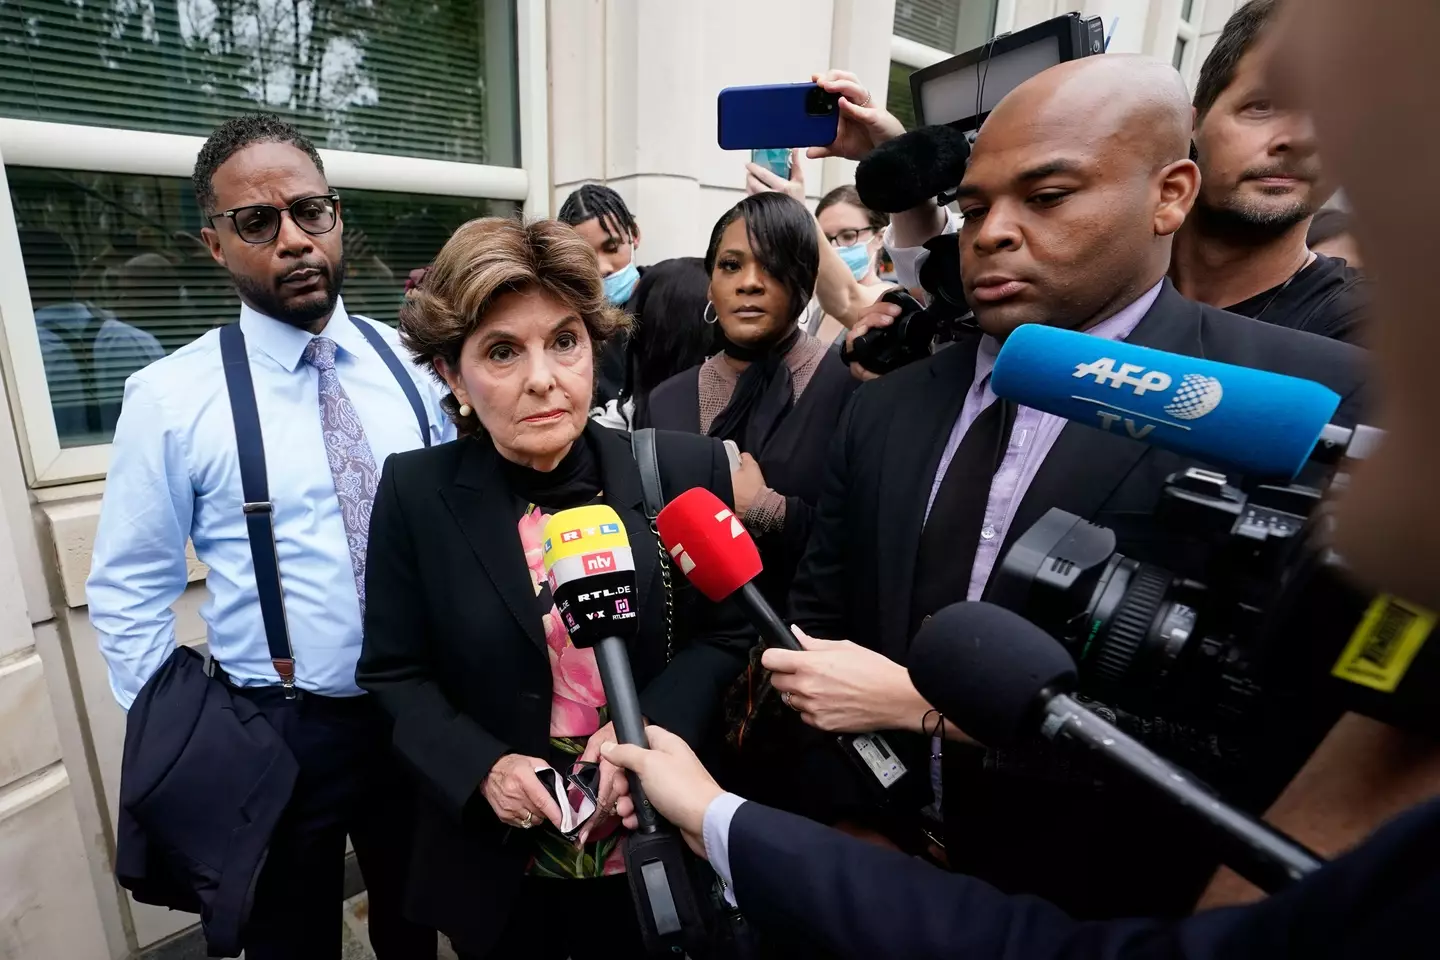 Attorney Gloria Allred arrived in court on day one of the trial (